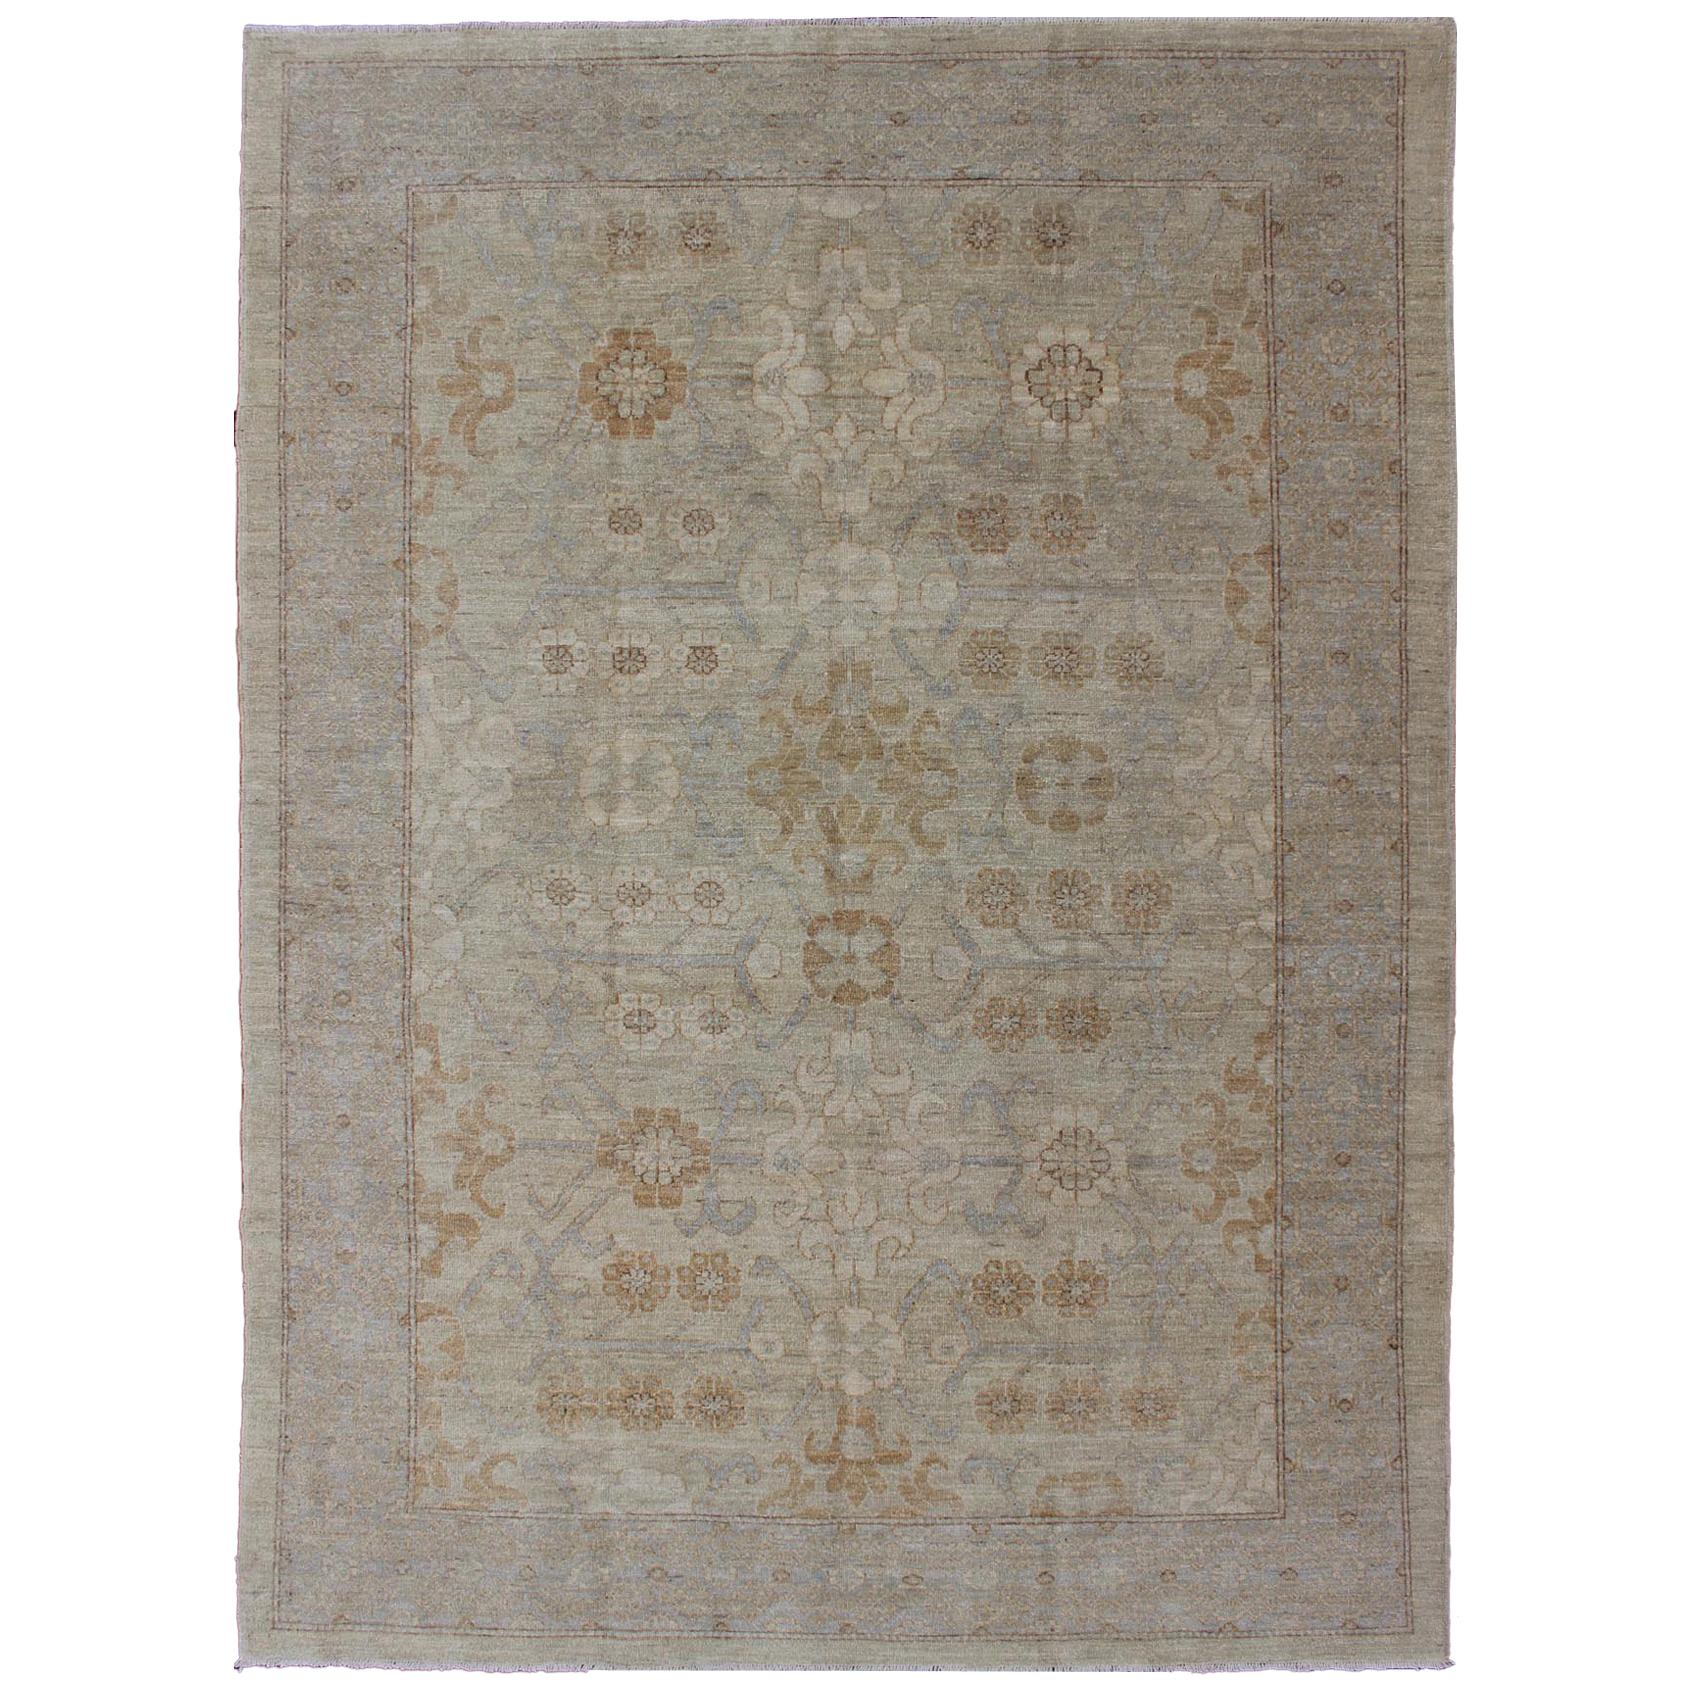 Fine Afghanistan Made Modern Khotan Rug With All-Over Geometric Pattern